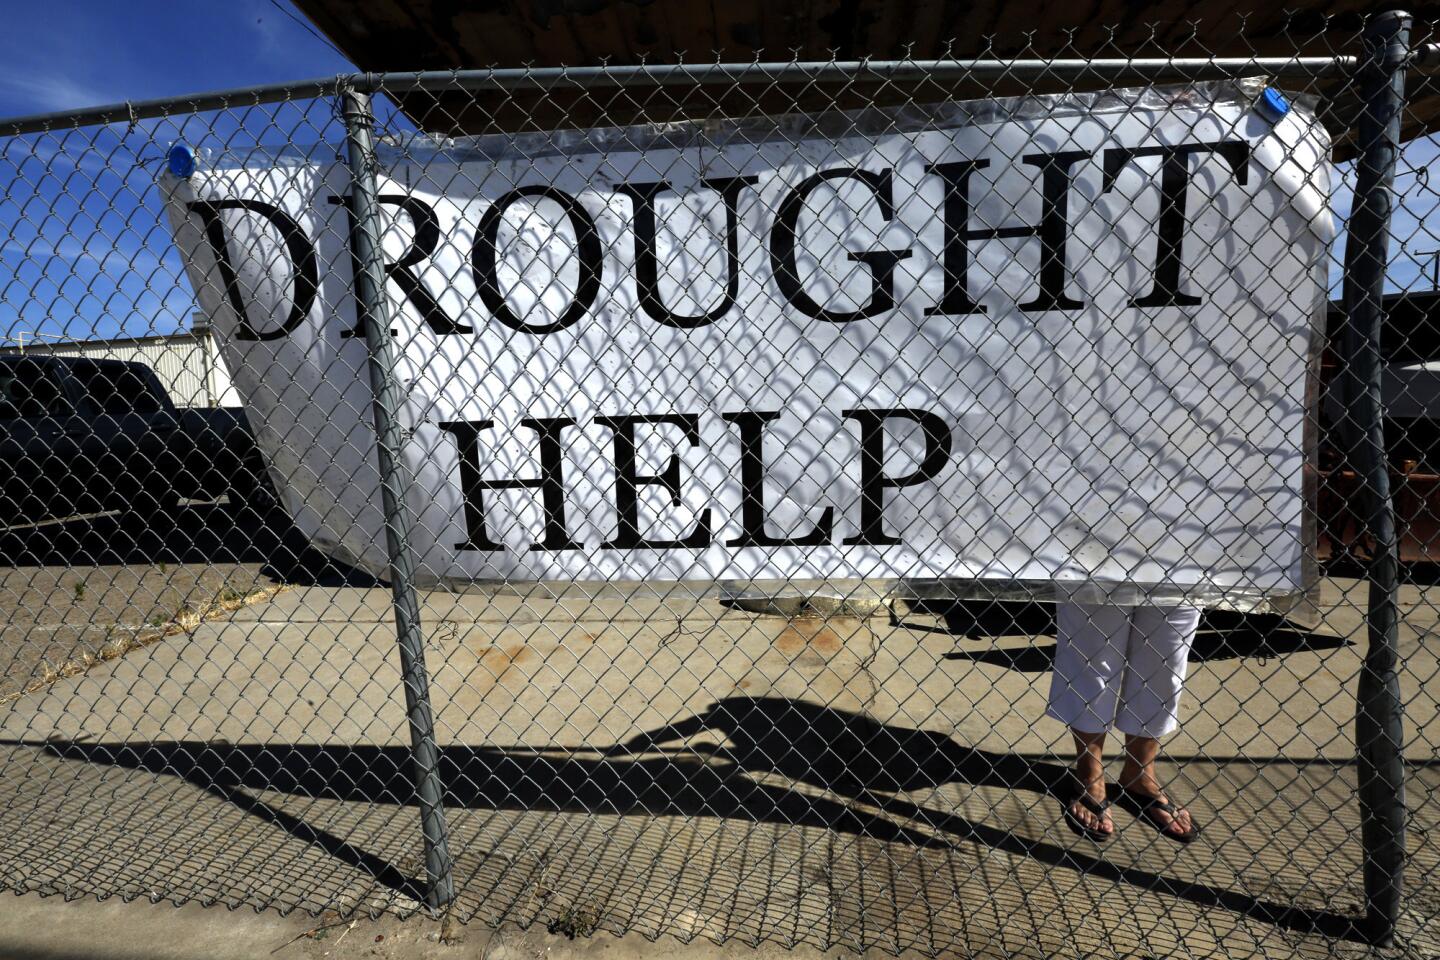 Drought woes